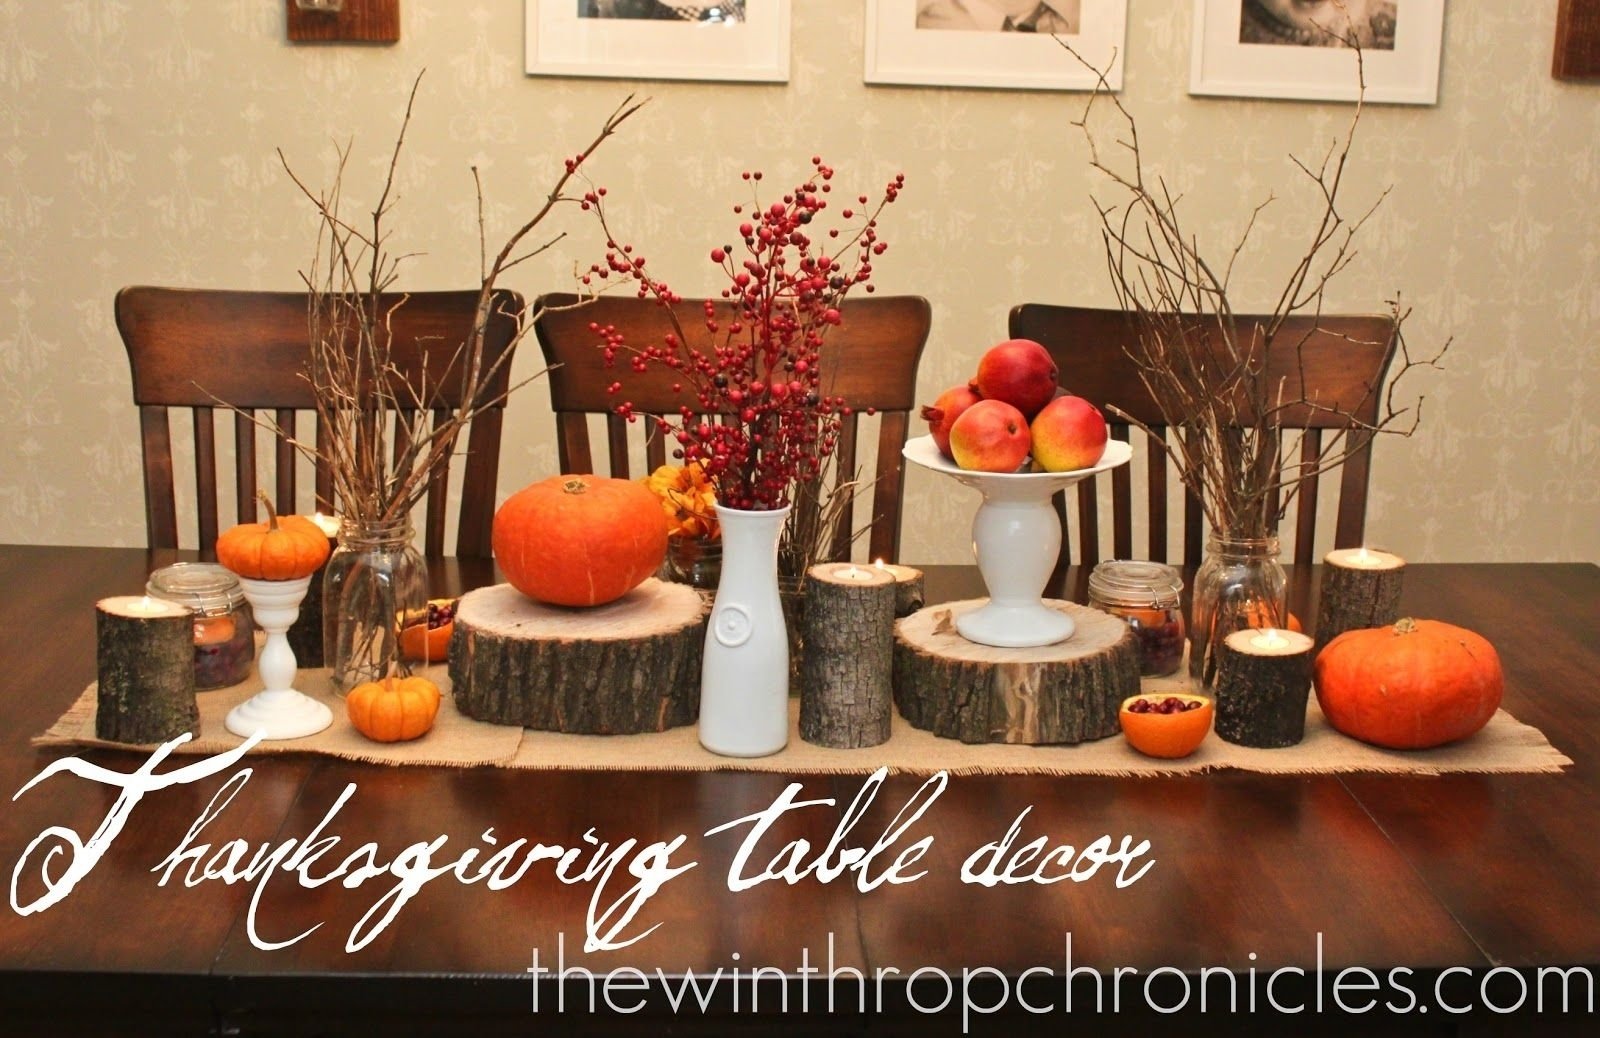 10 Spectacular Decorating Ideas For Thanksgiving Table furniture design thanksgiving table decorating ideas furniture ideas 2022